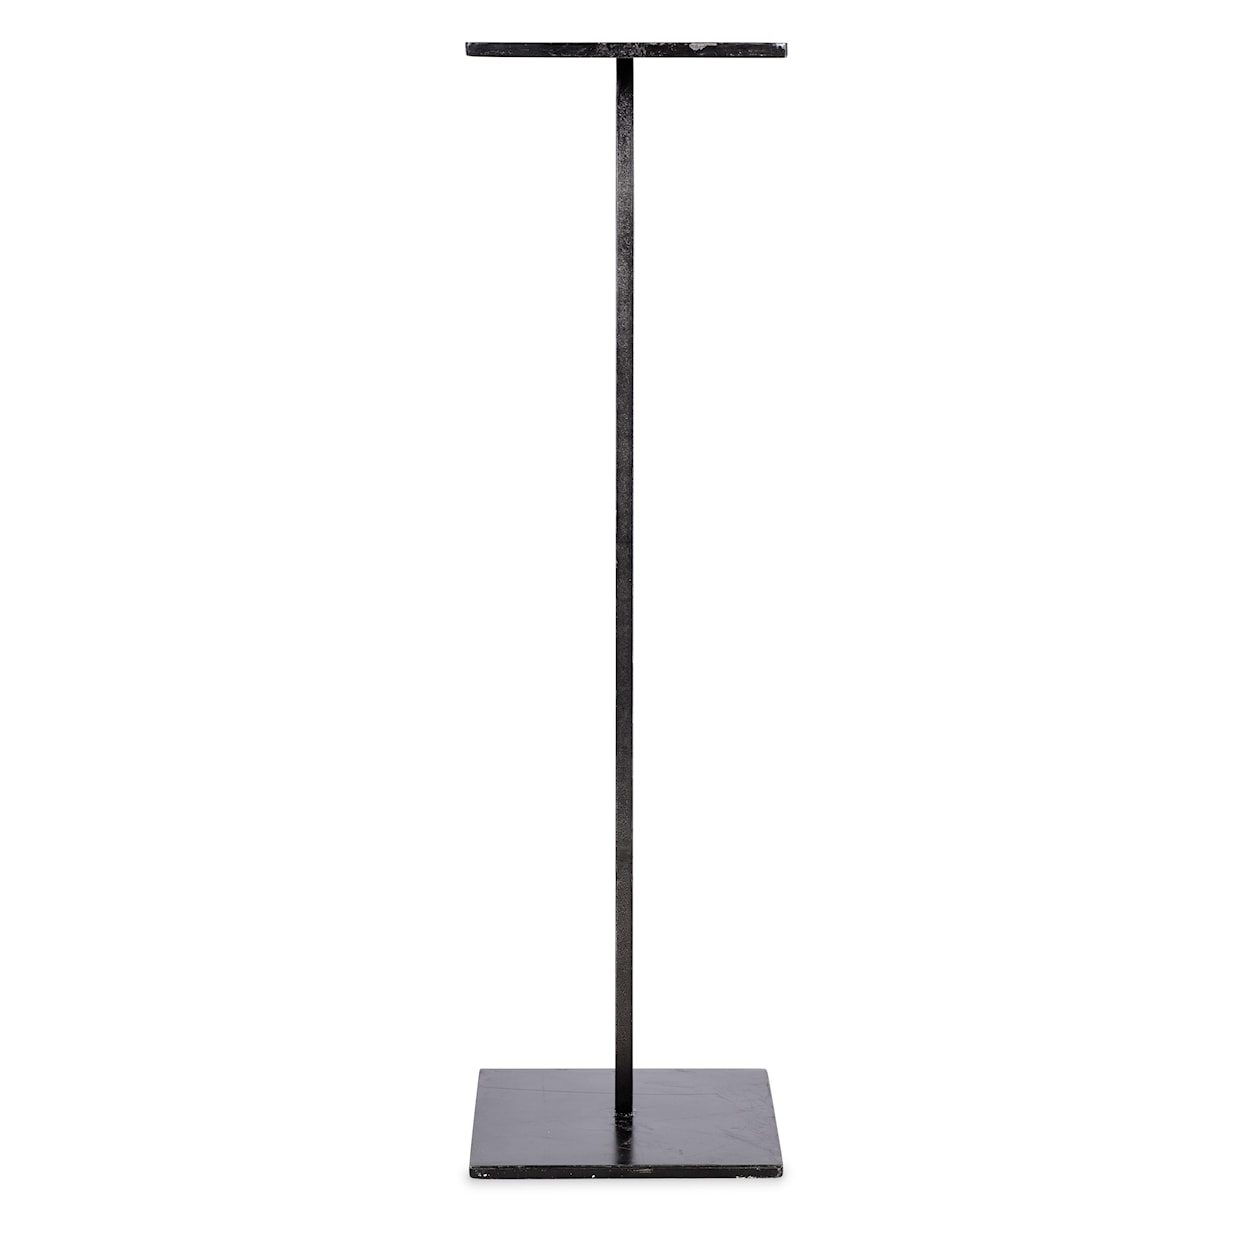 BOBO Intriguing Objects BOBO Intriguing Objects Modern Floor Candle Stand - Large